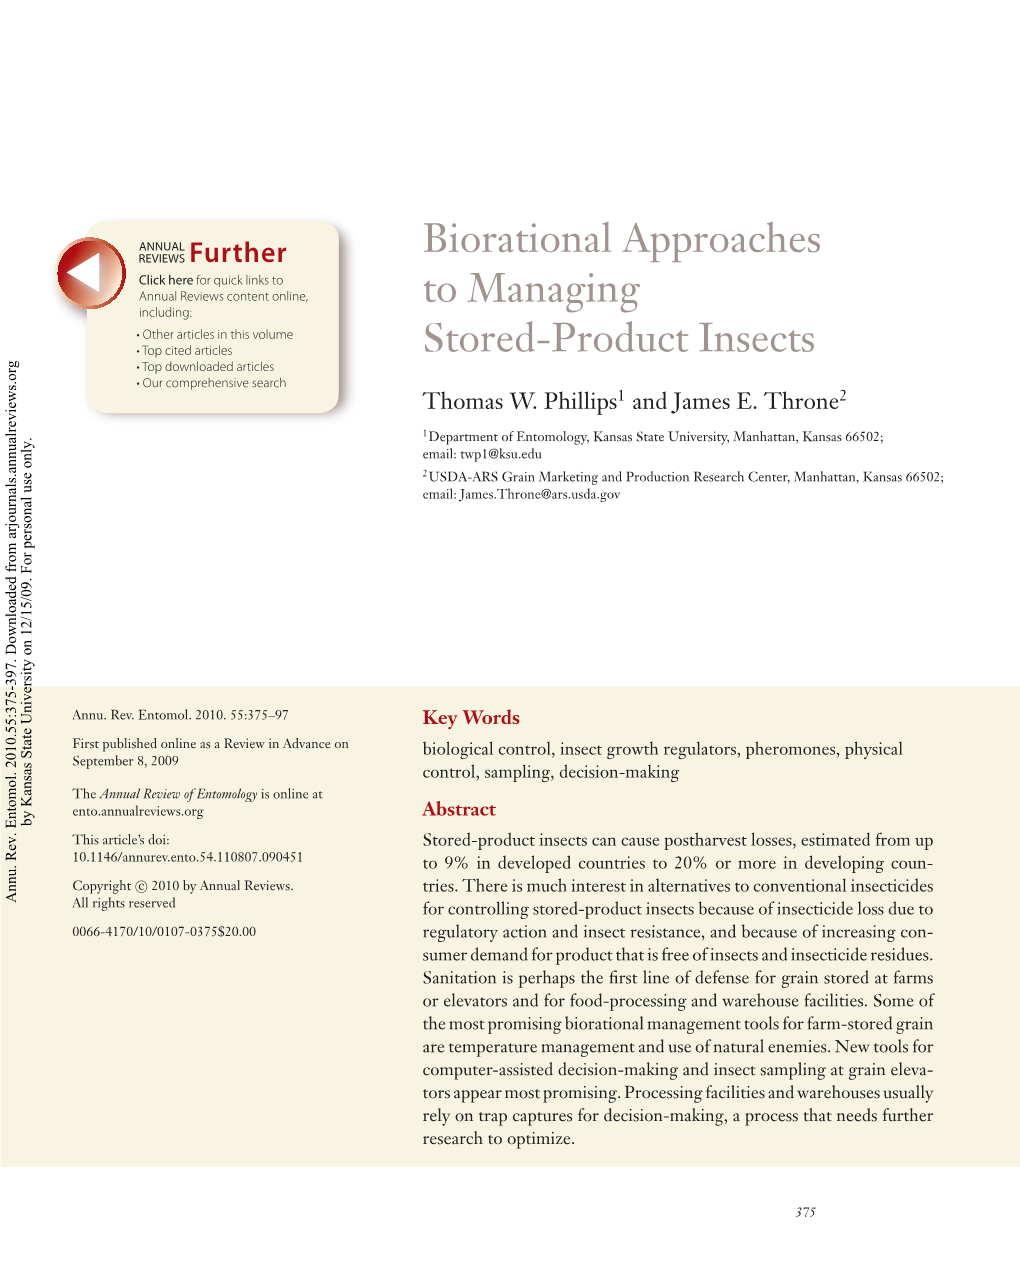 Biorational Approaches to Managing Stored-Product Insects